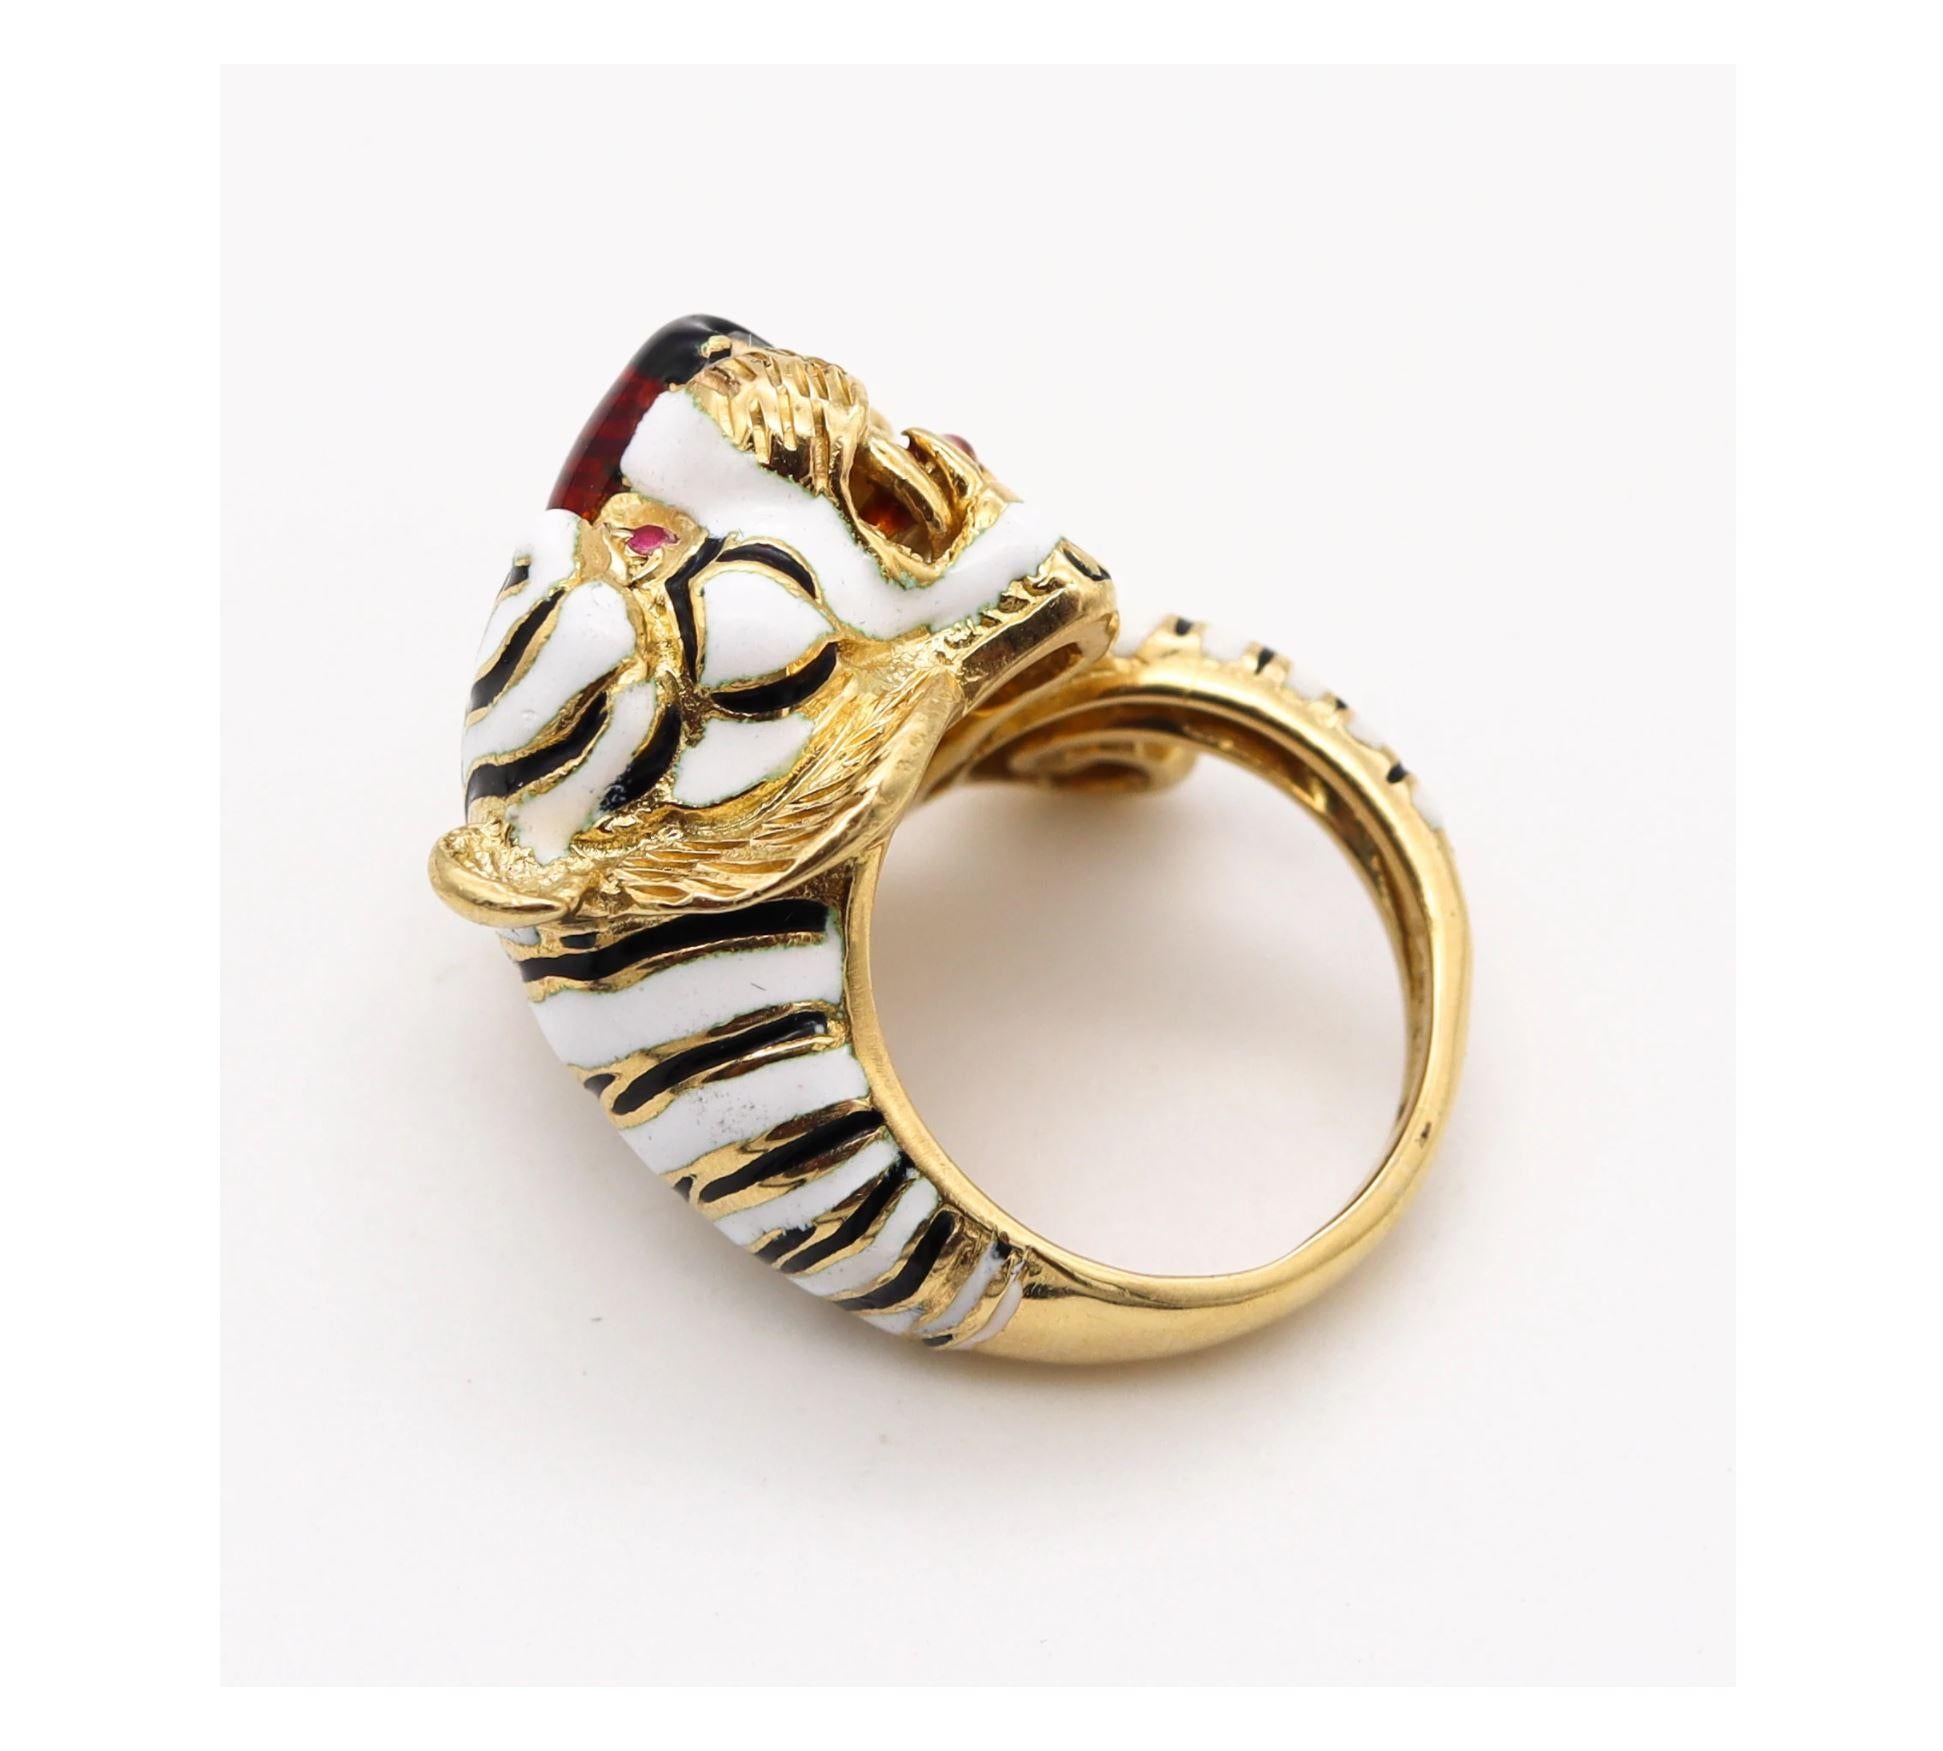 Cabochon Frascarolo Milano Enameled Tiger Cocktail Ring in 18Kt Yellow Gold with Rubies